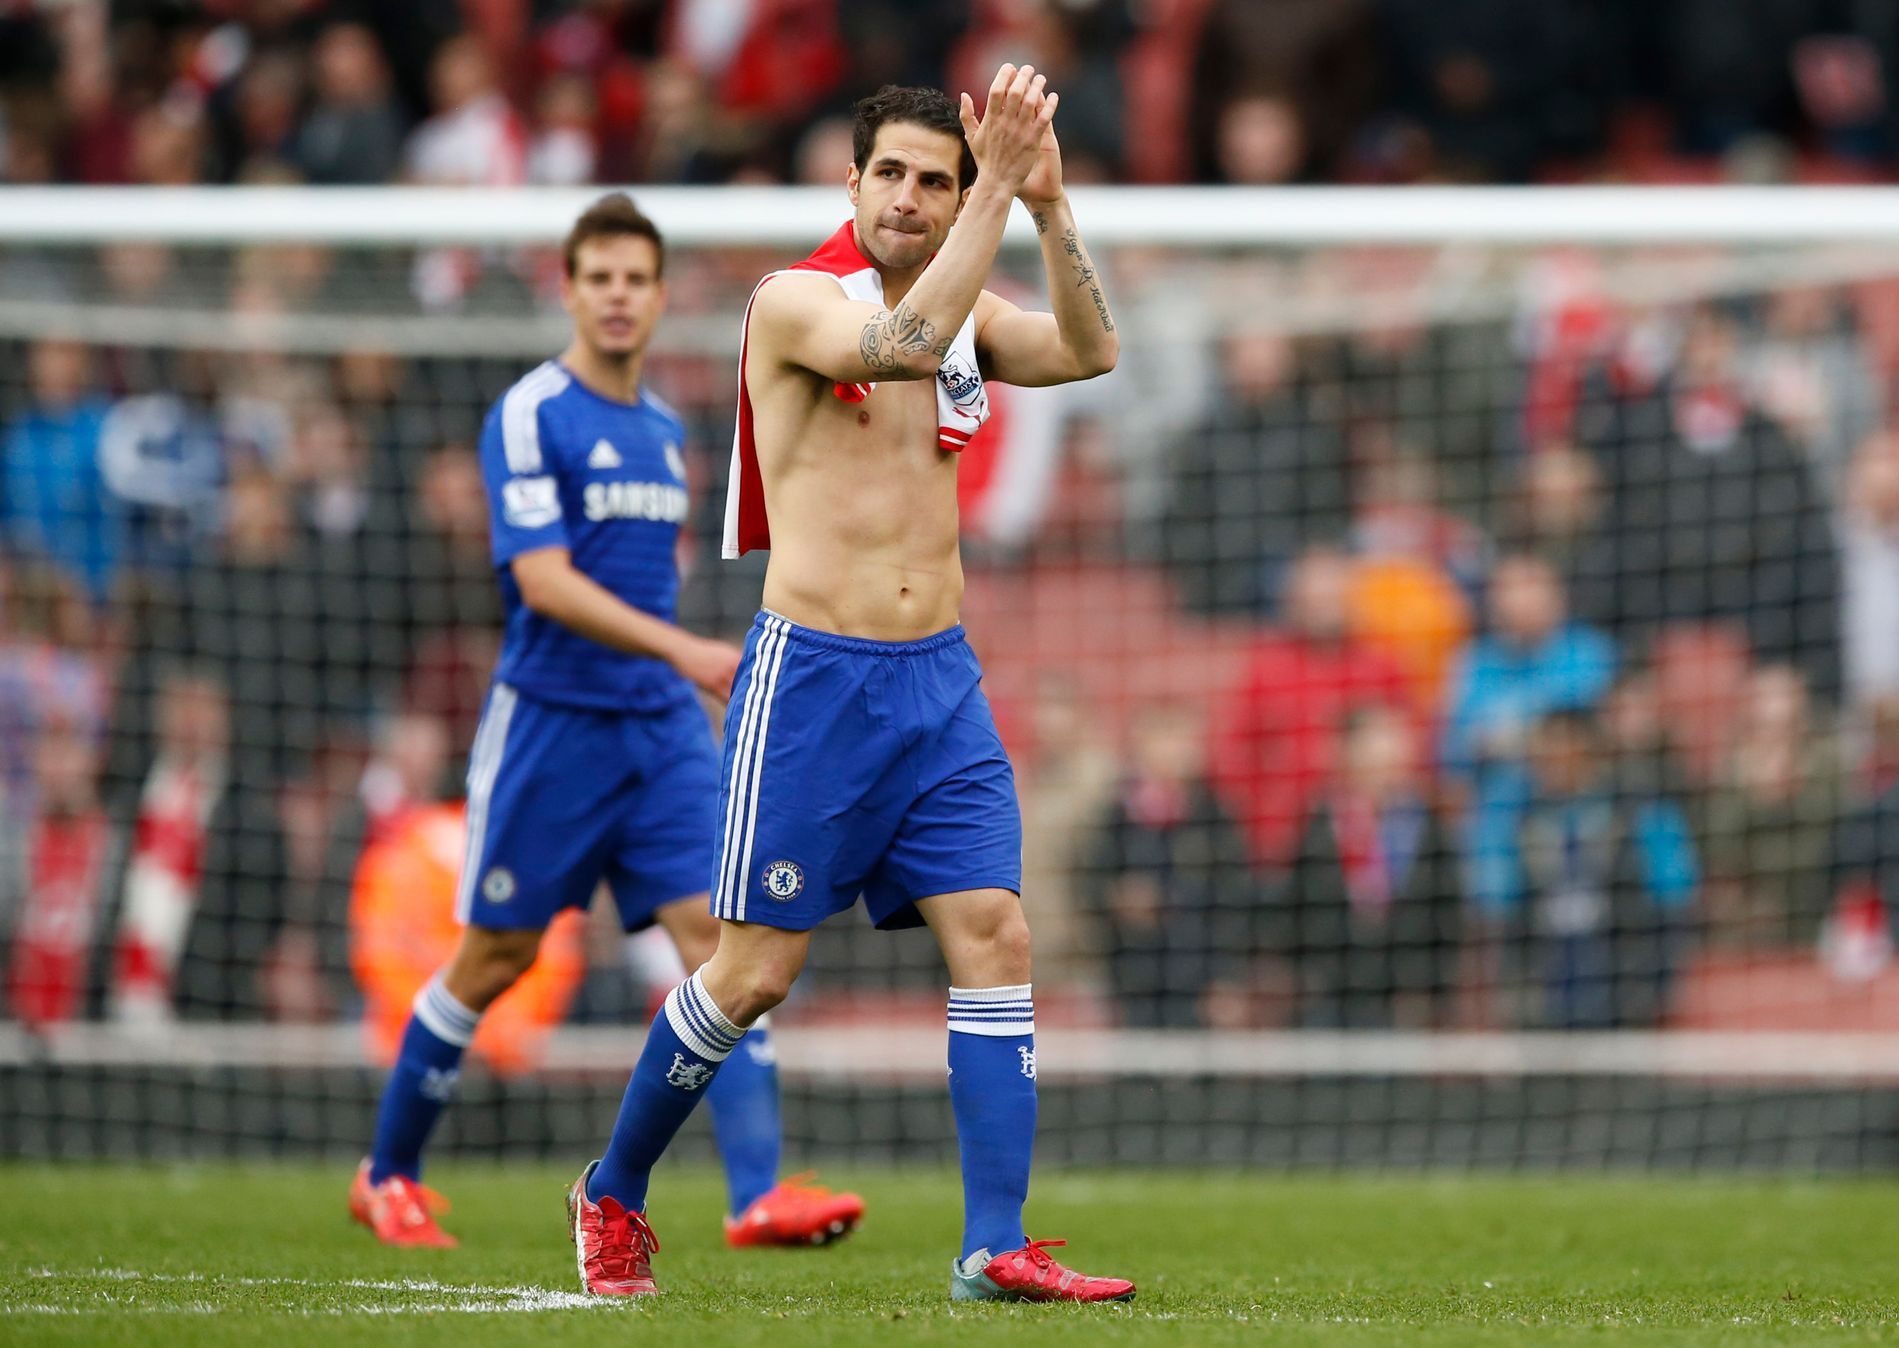 Football: Chelsea's Cesc Fabregas applauds the fans after the game